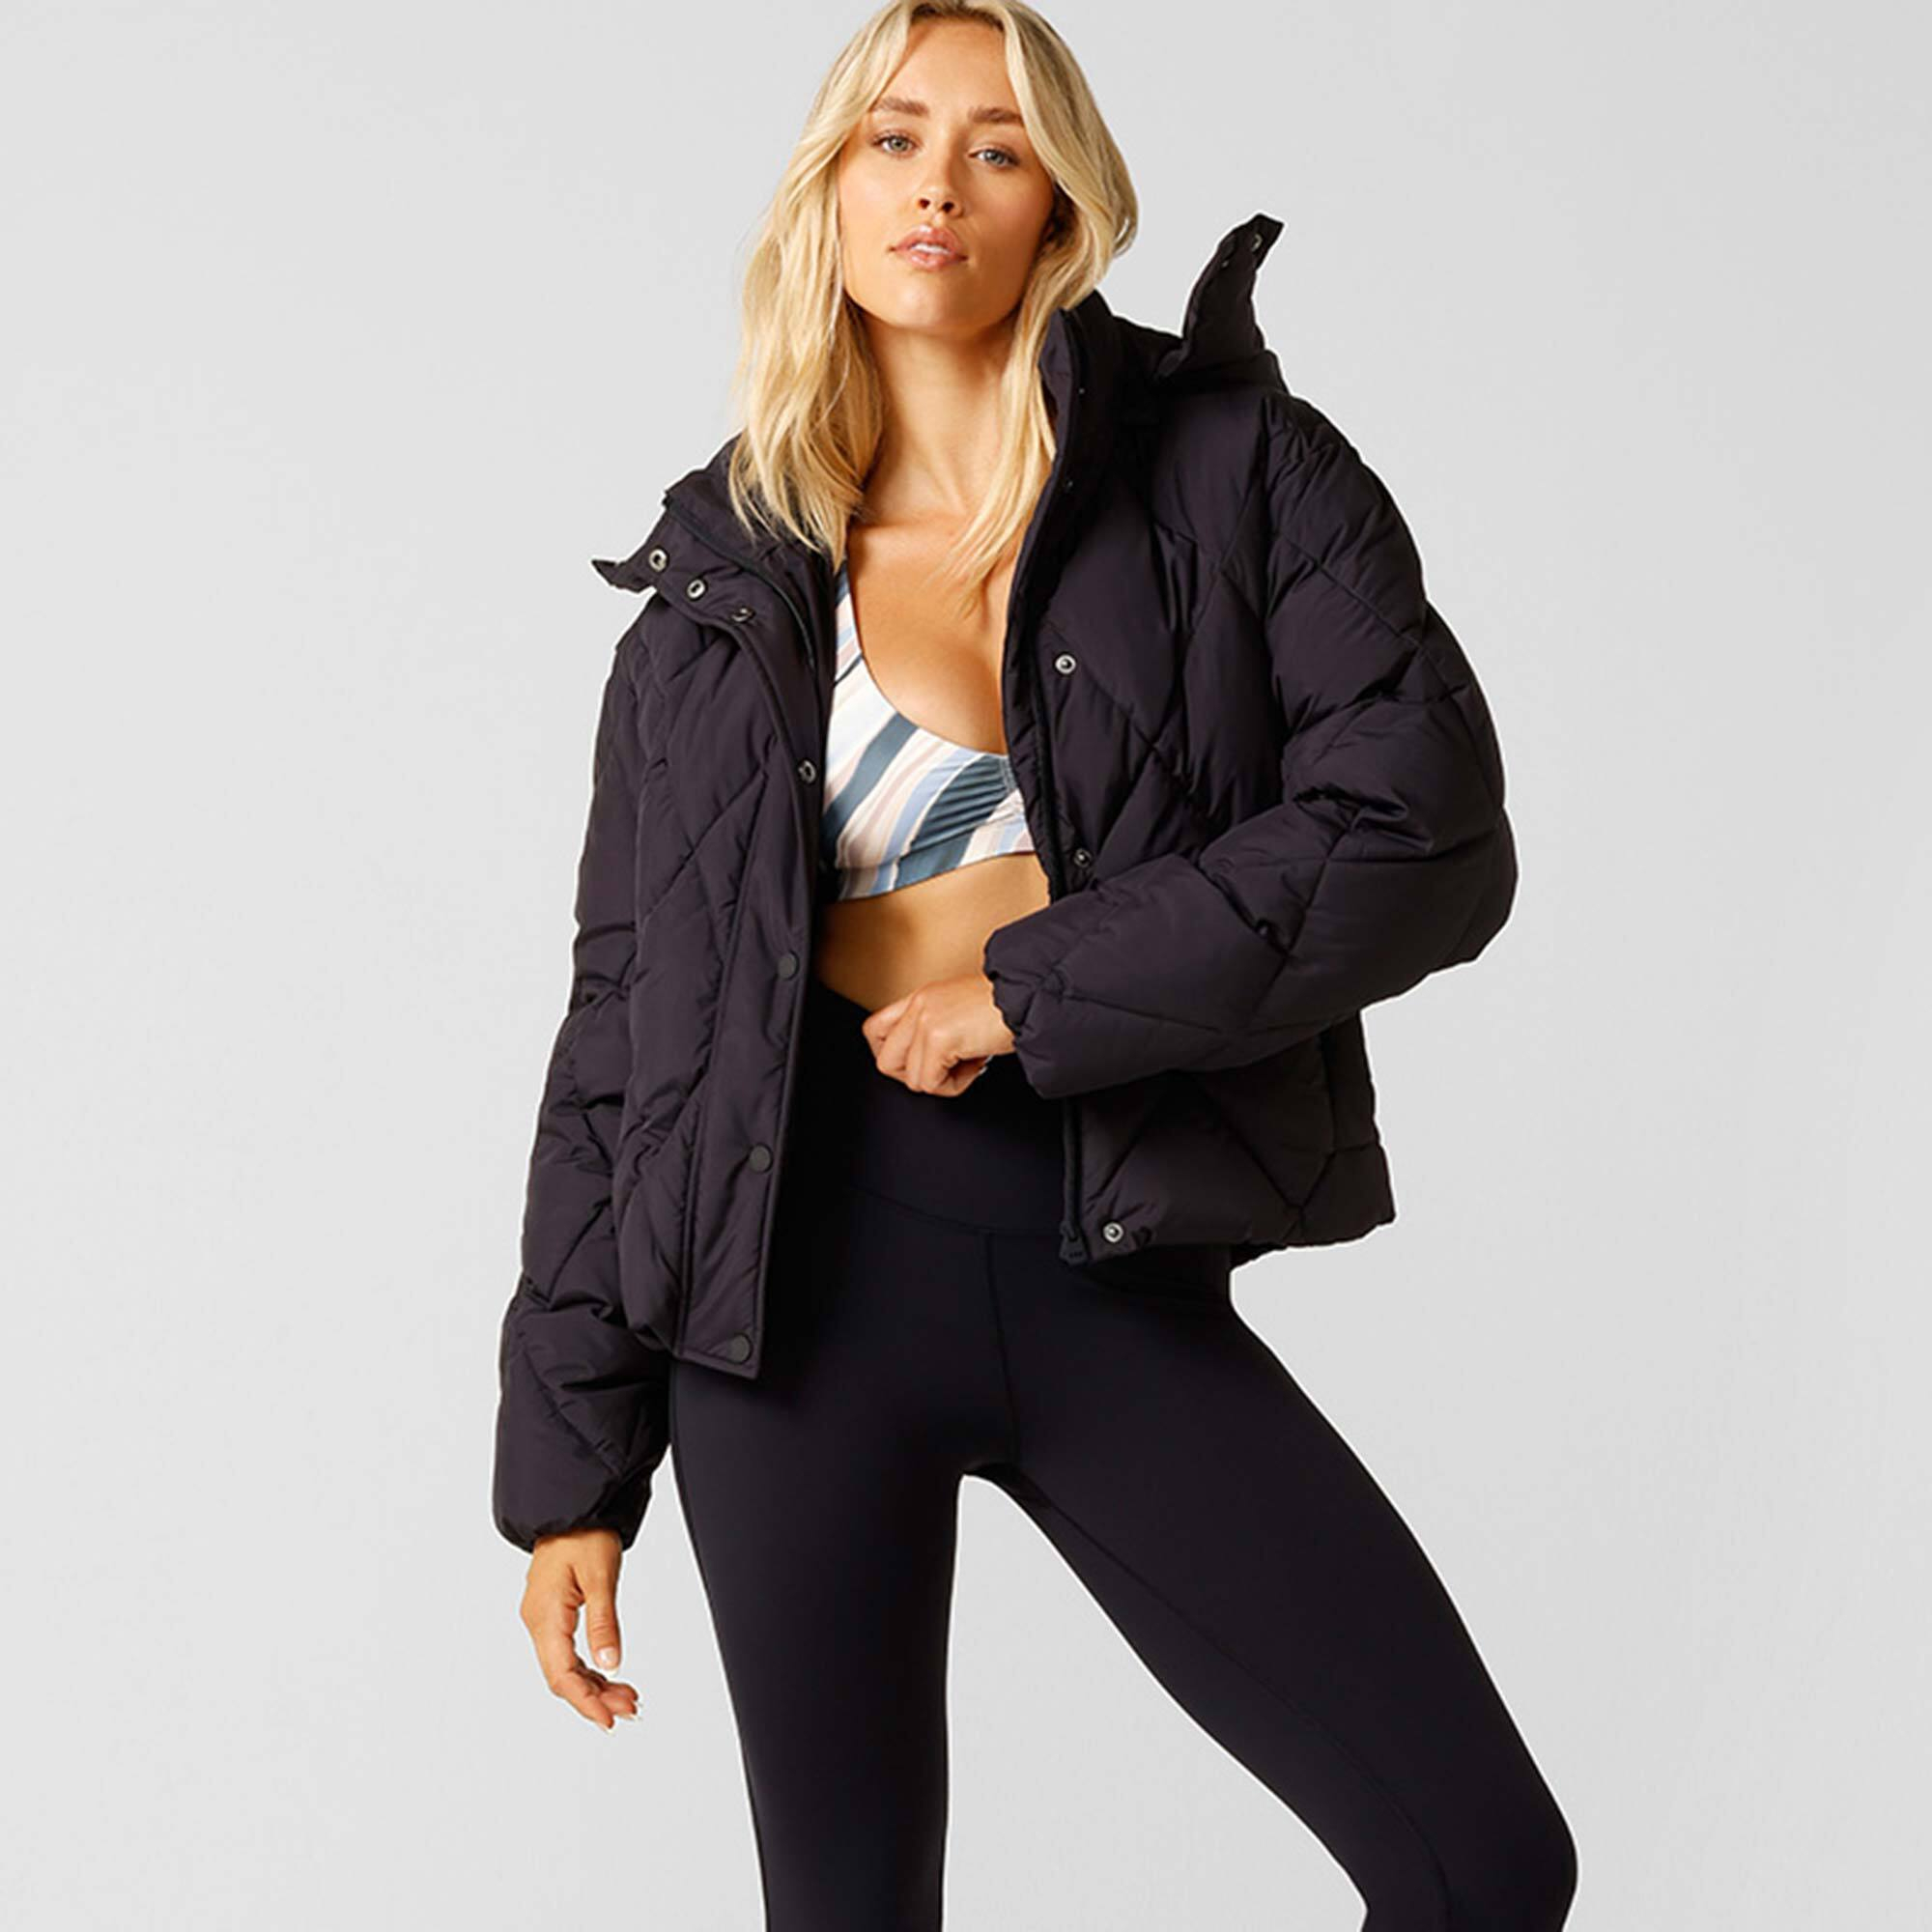 Lorna Jane Winter Warmth Recycled Puffer Jacket